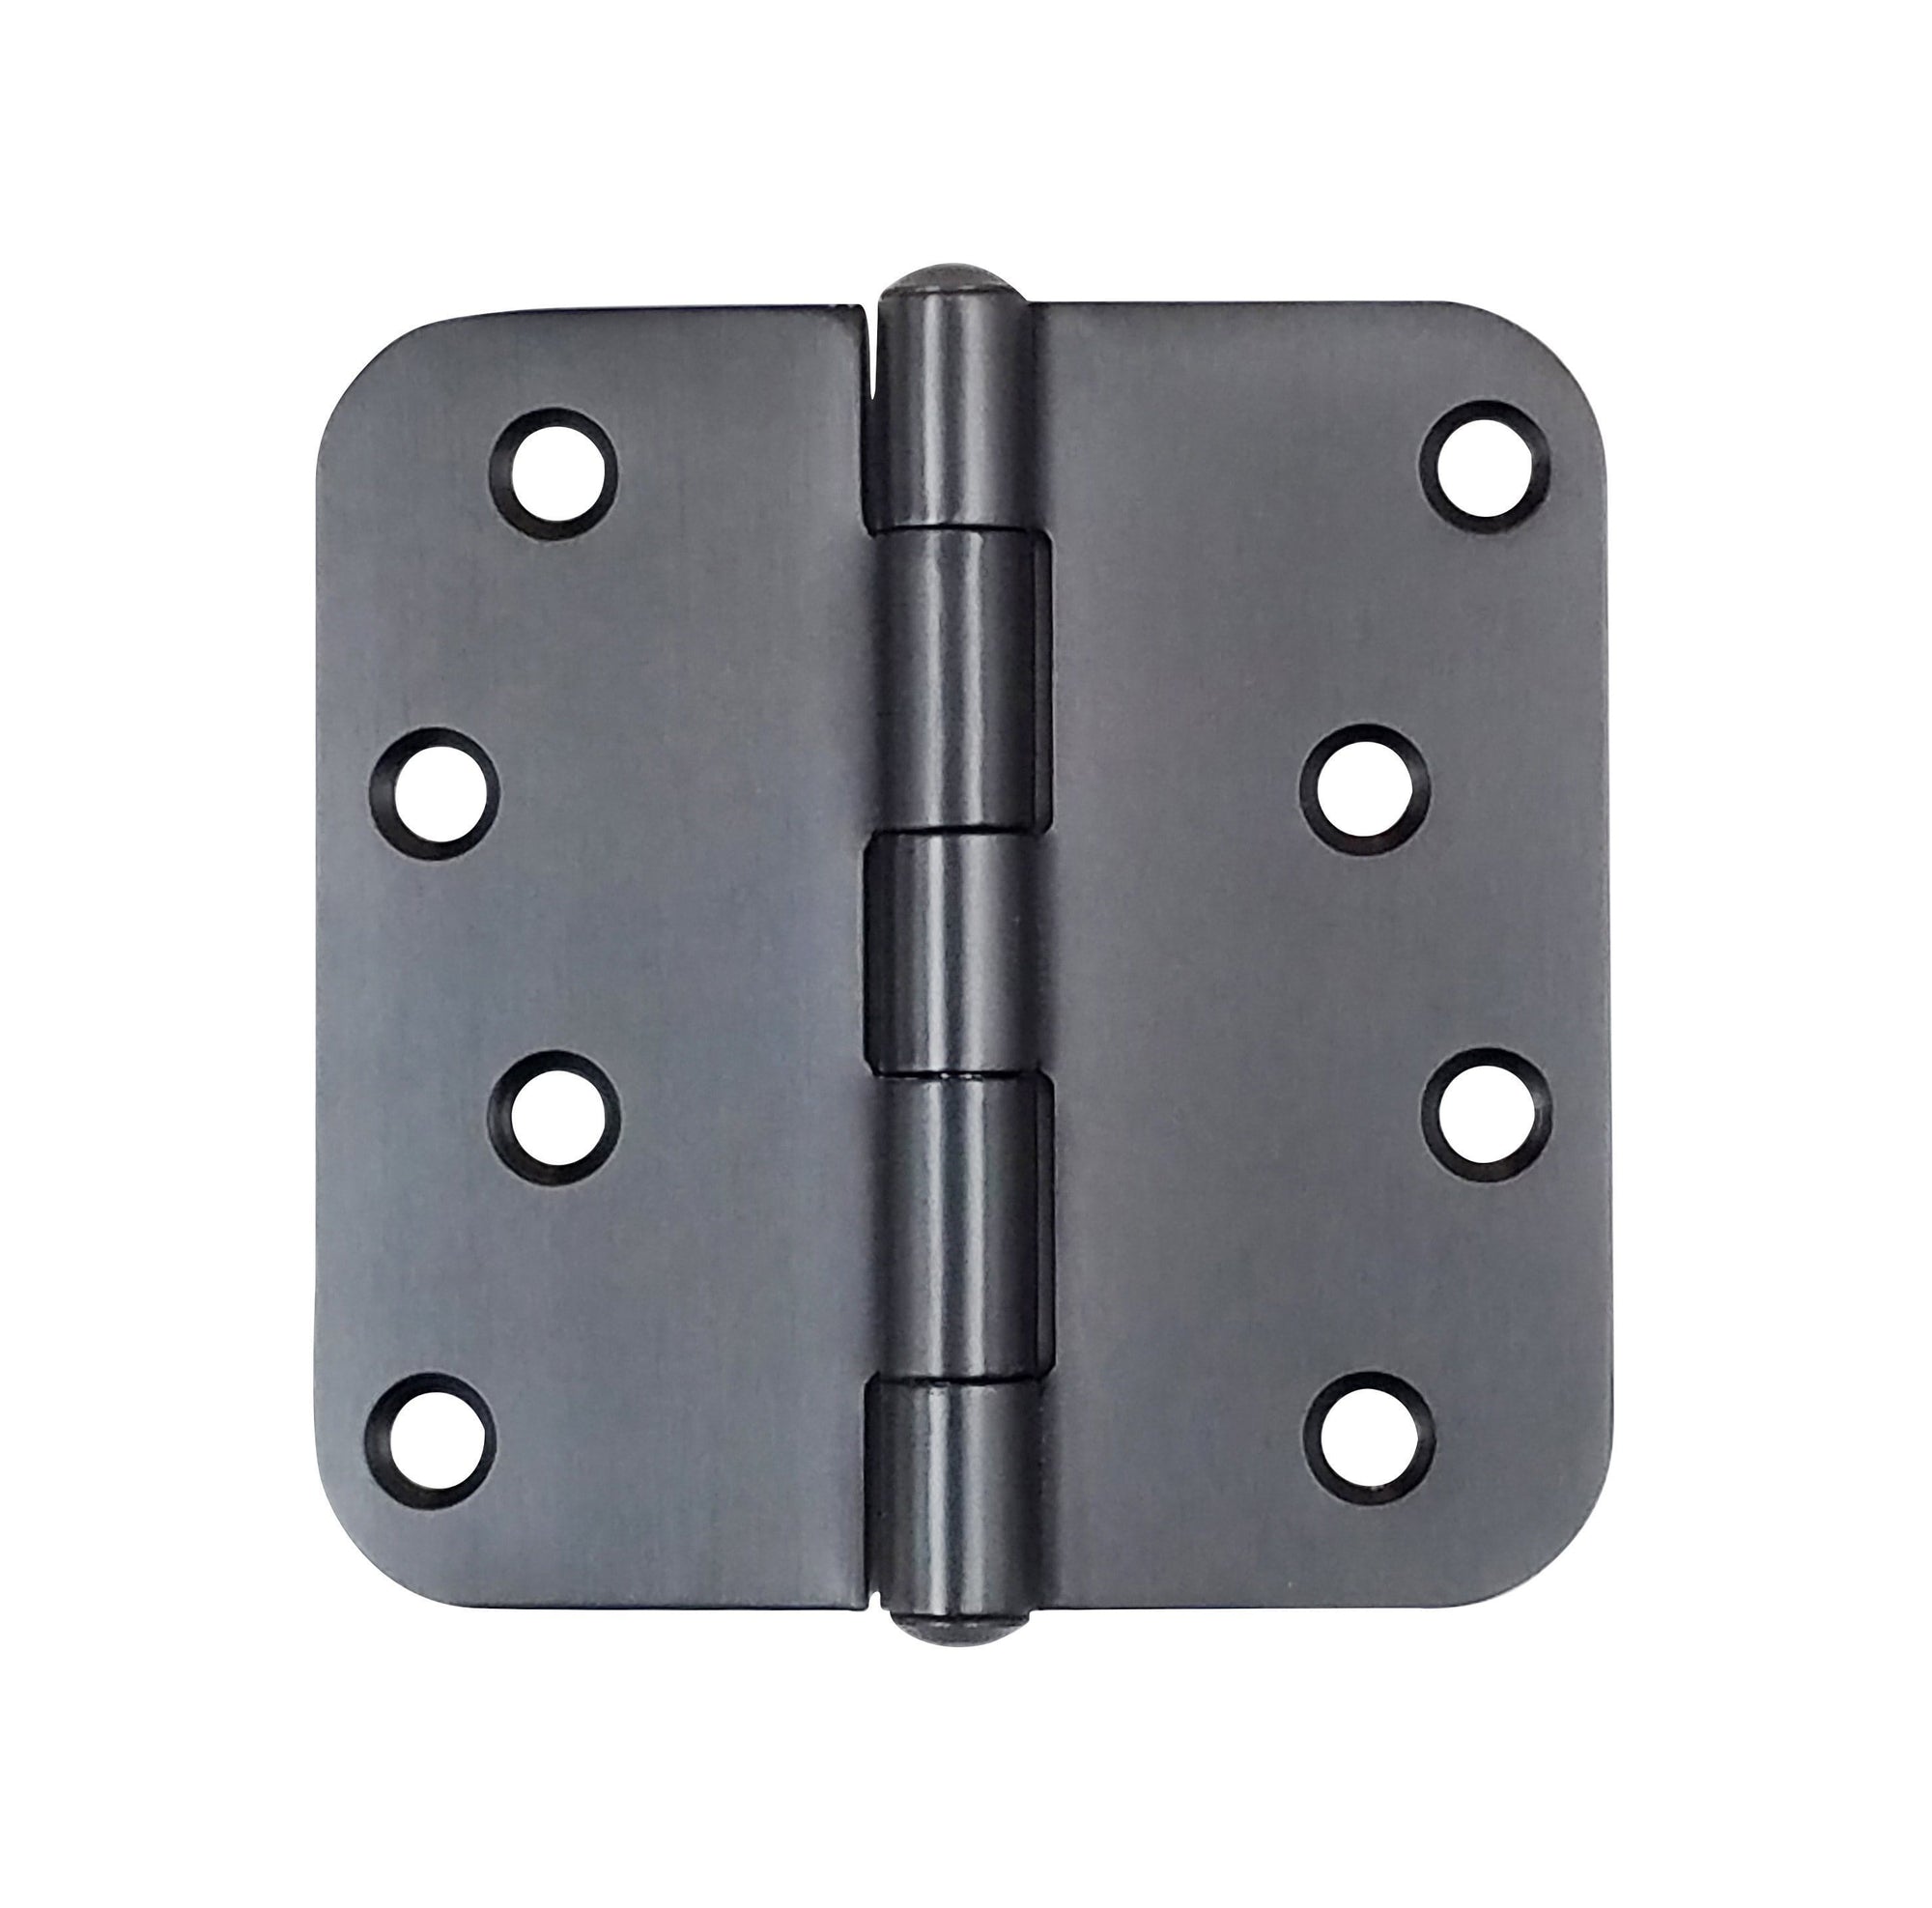 Stainless Steel Hinges - Oil Rubbed Bronze Stainless Steel Hinges Residential Hinges - 4" Inch With 5/8" Inch Radius - Highly Rust Resistant - 3 Pack